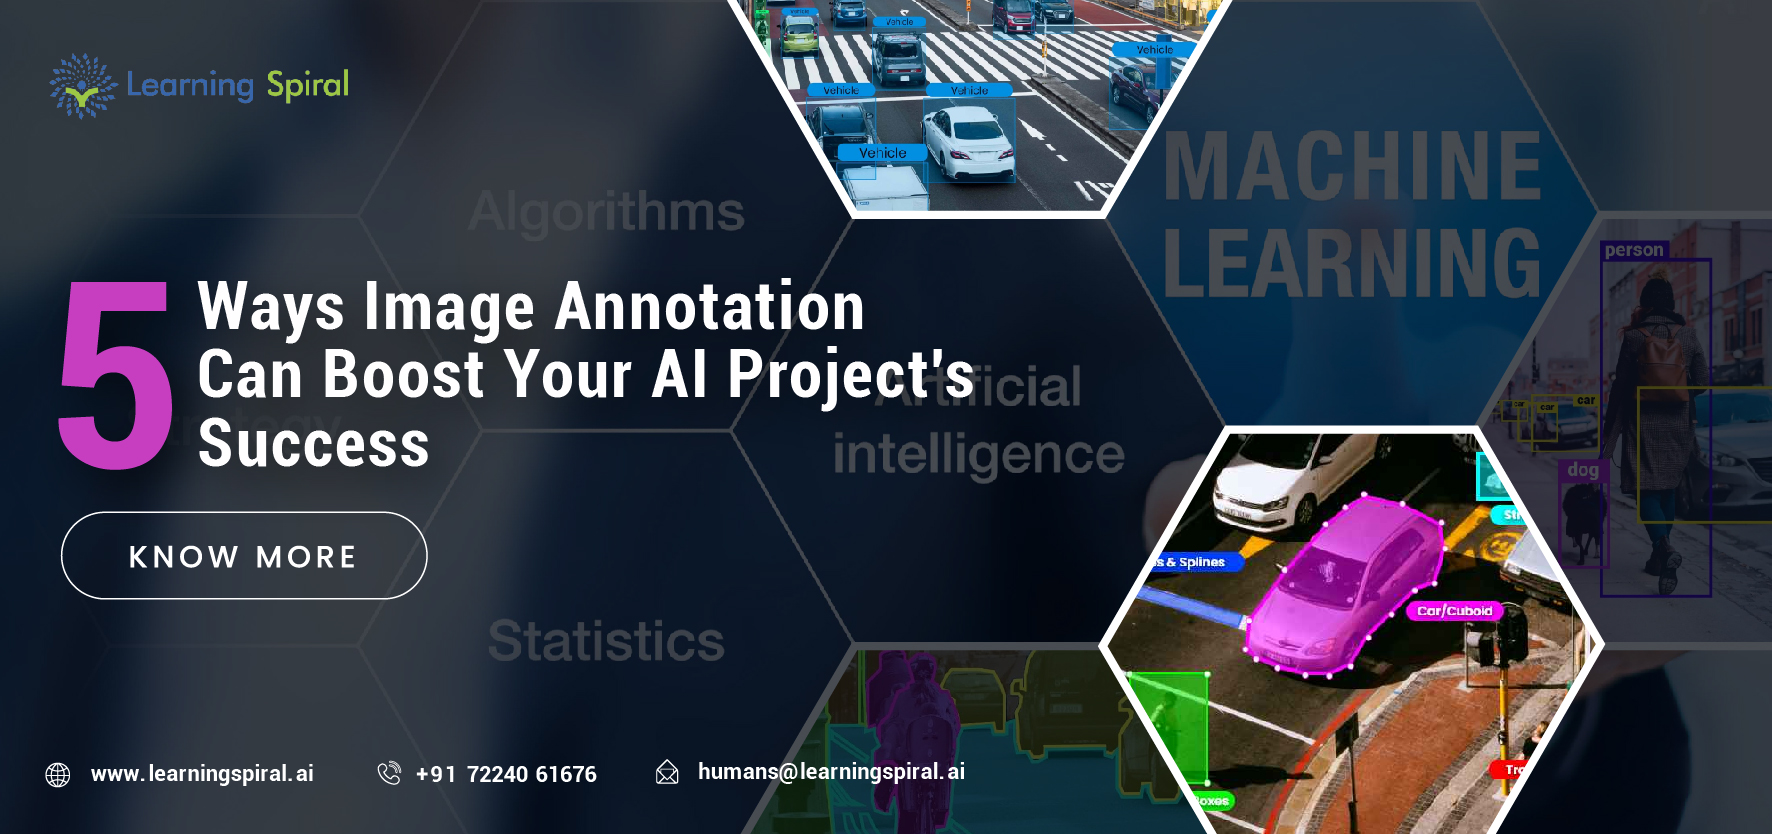 5_Ways_Image_Annotation_Can_Boost_Your_AI_Project_s_Success-01